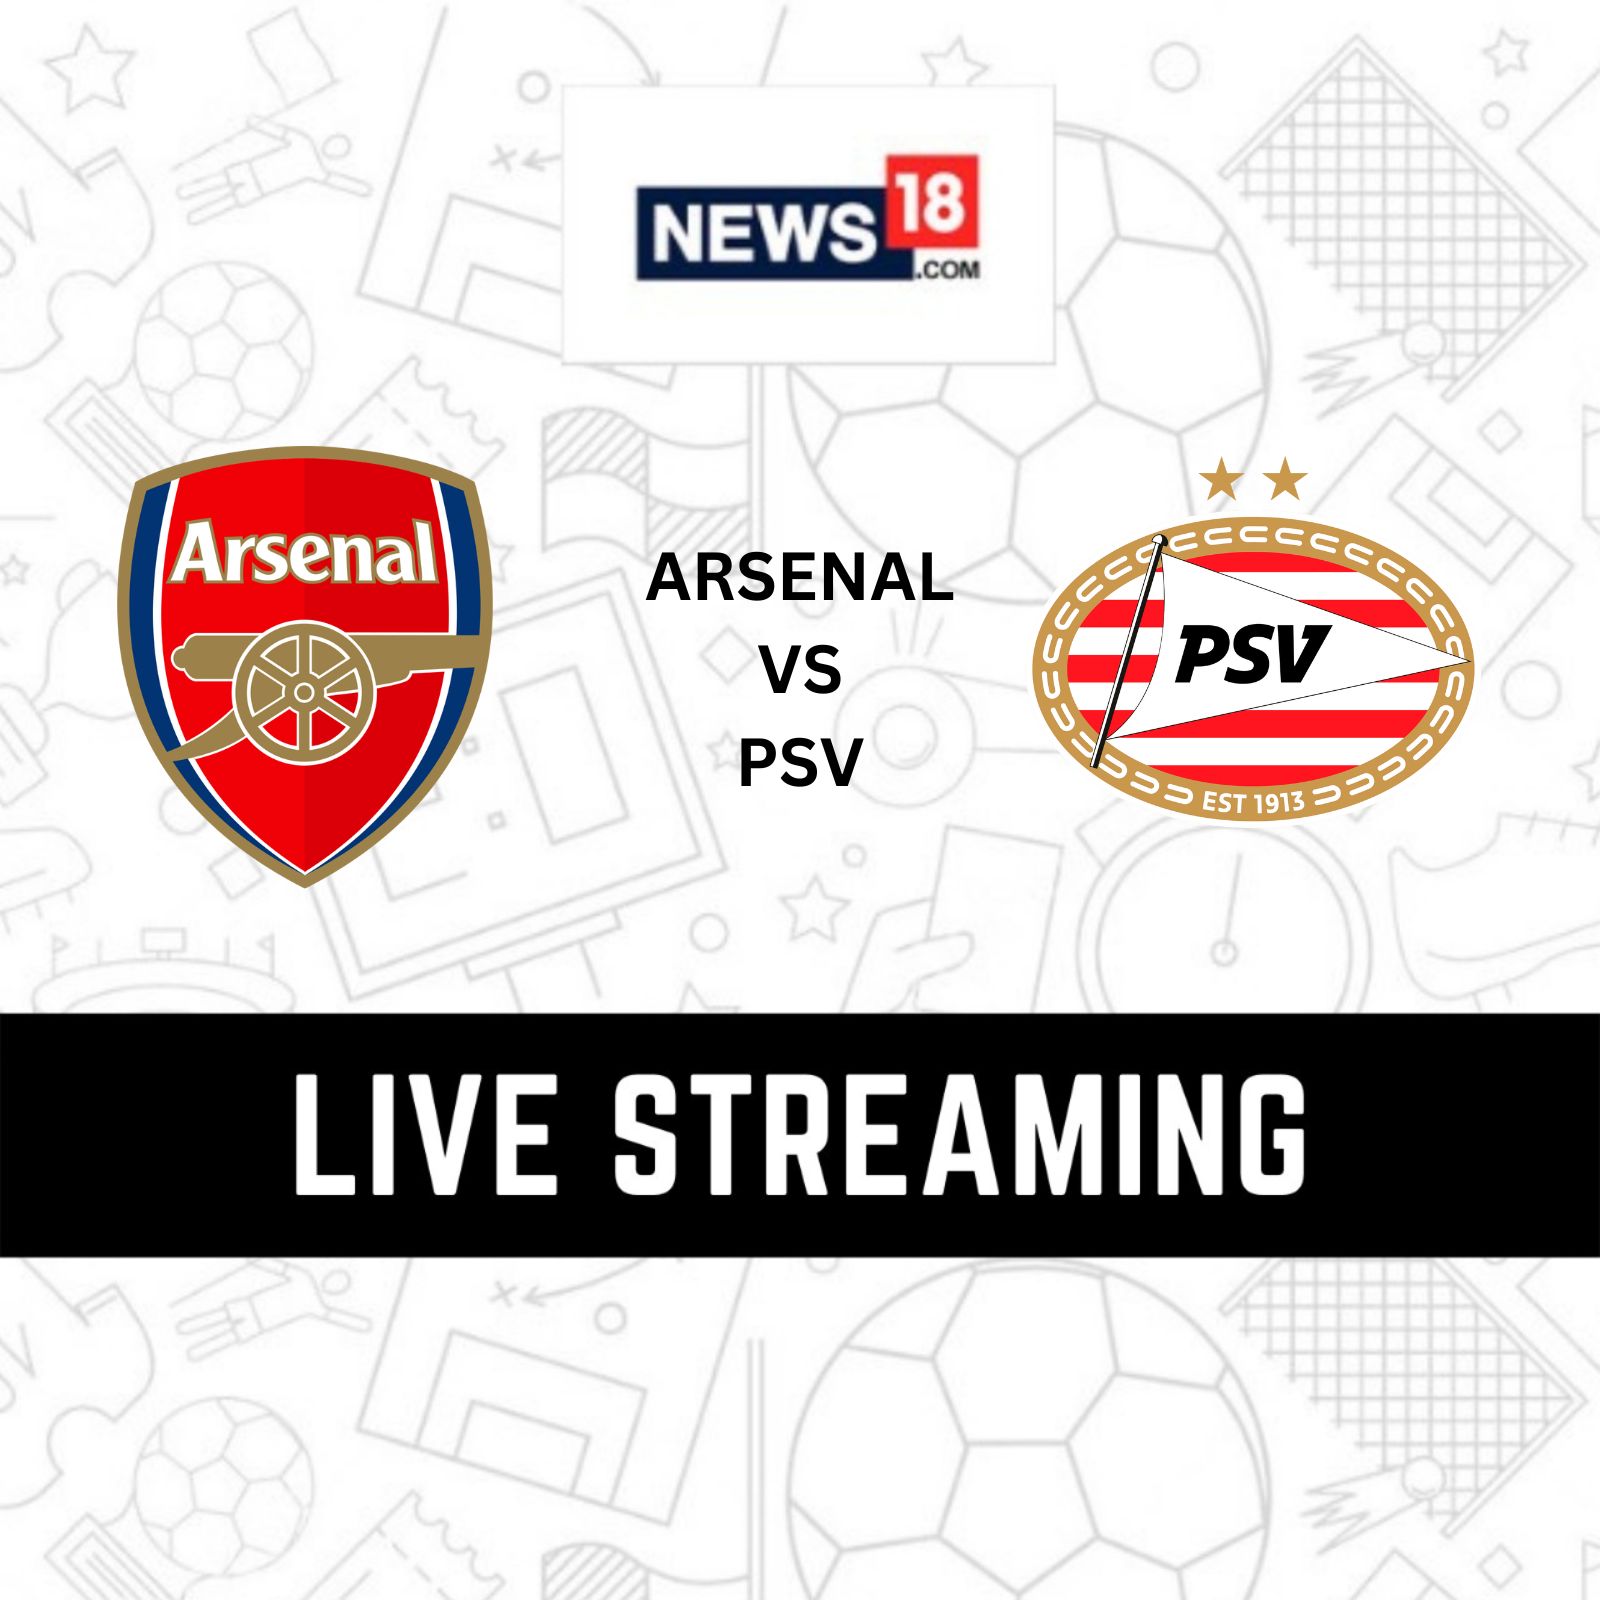 Arsenal vs PSV Eindhoven Live Streaming When and Where to Watch Europa League Live Coverage on Live TV Online